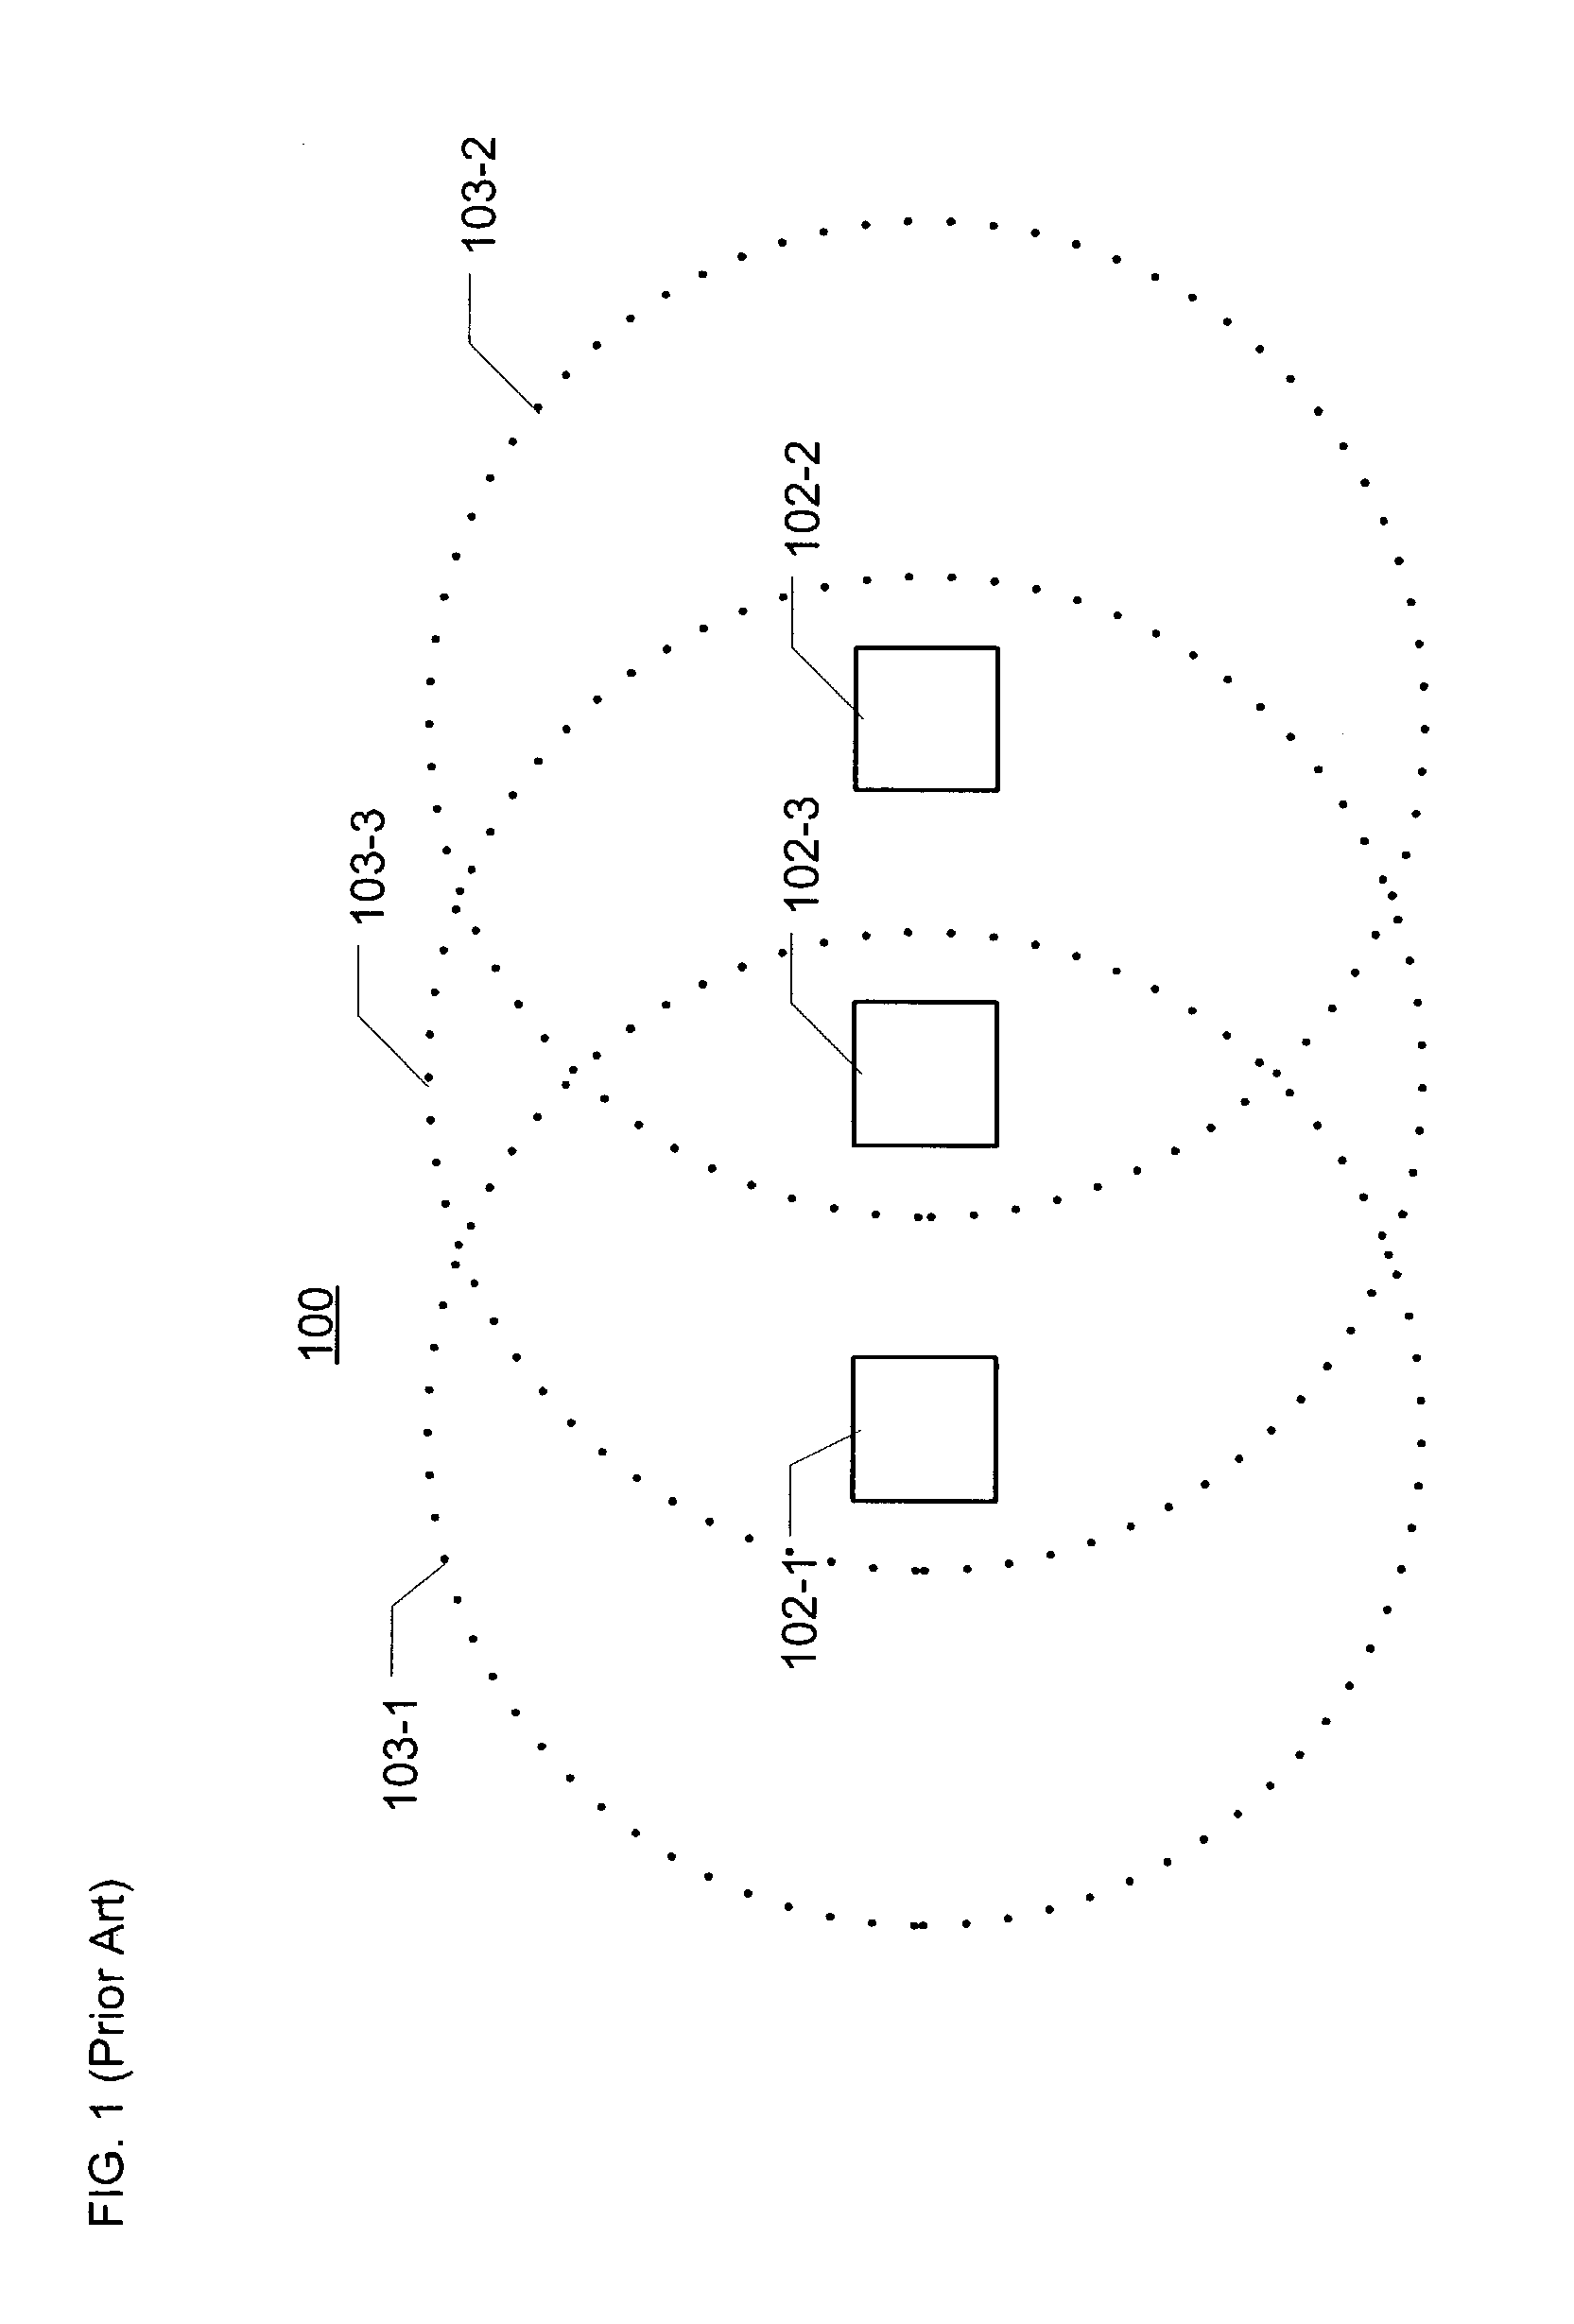 Transmission protection for communications networks having stations operating with different modulation formats